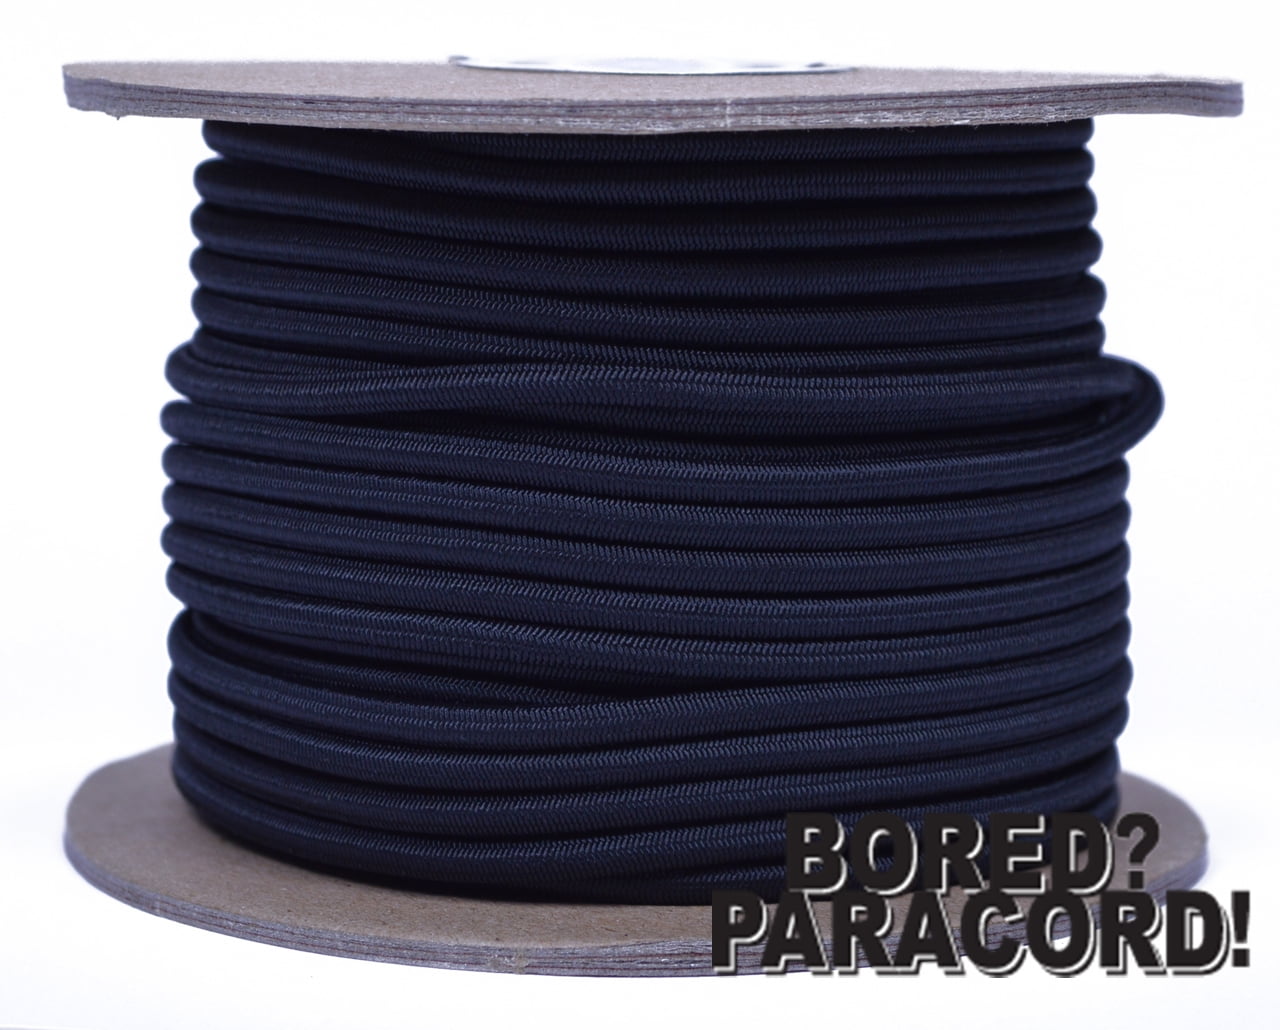 1/4" X 500 FT Bungee Cord Shock Cord Bungie Cord Marine Grade Made in USA!! BLK 